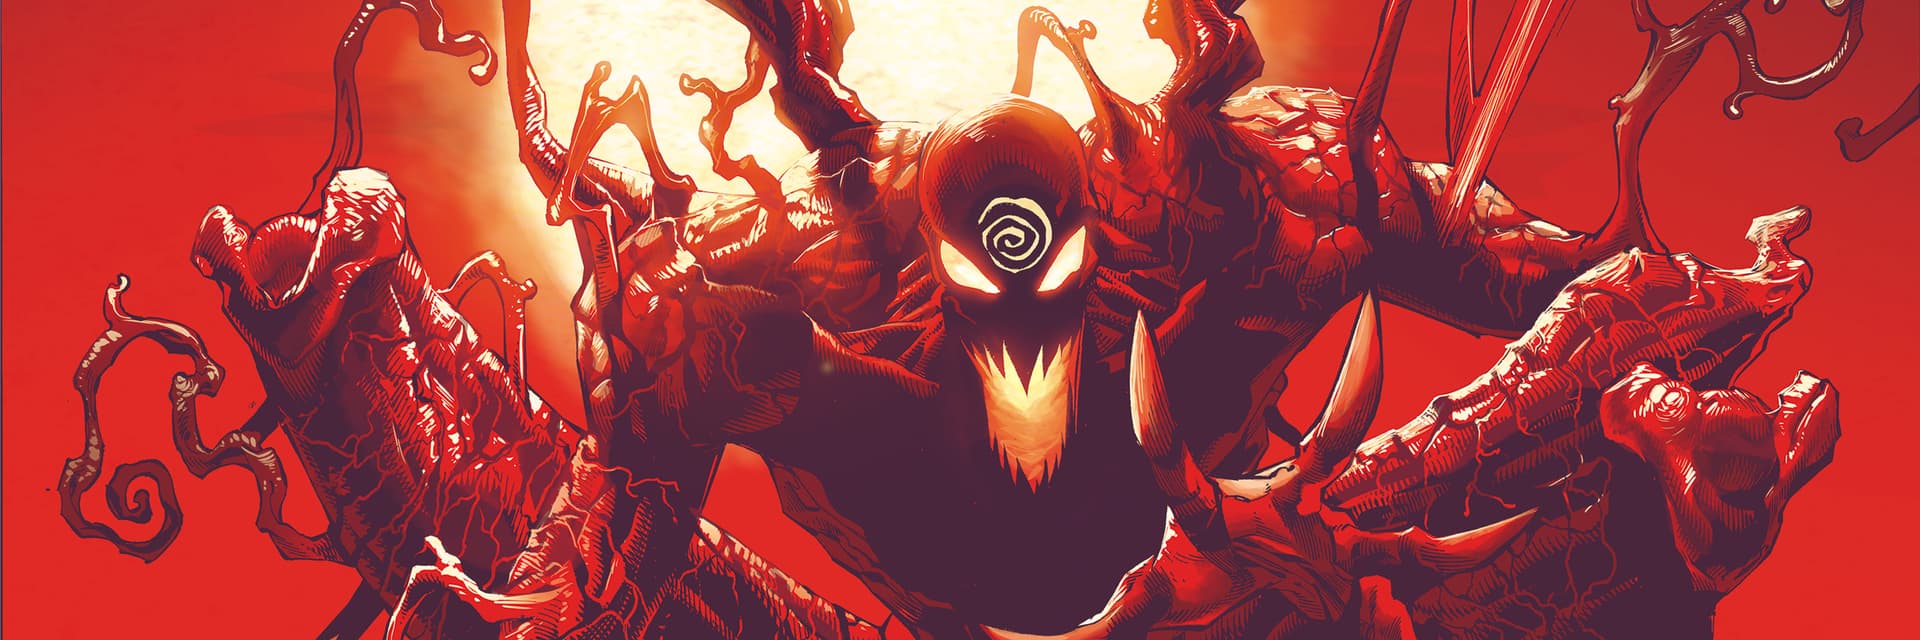 Absolute Carnage Poster Art